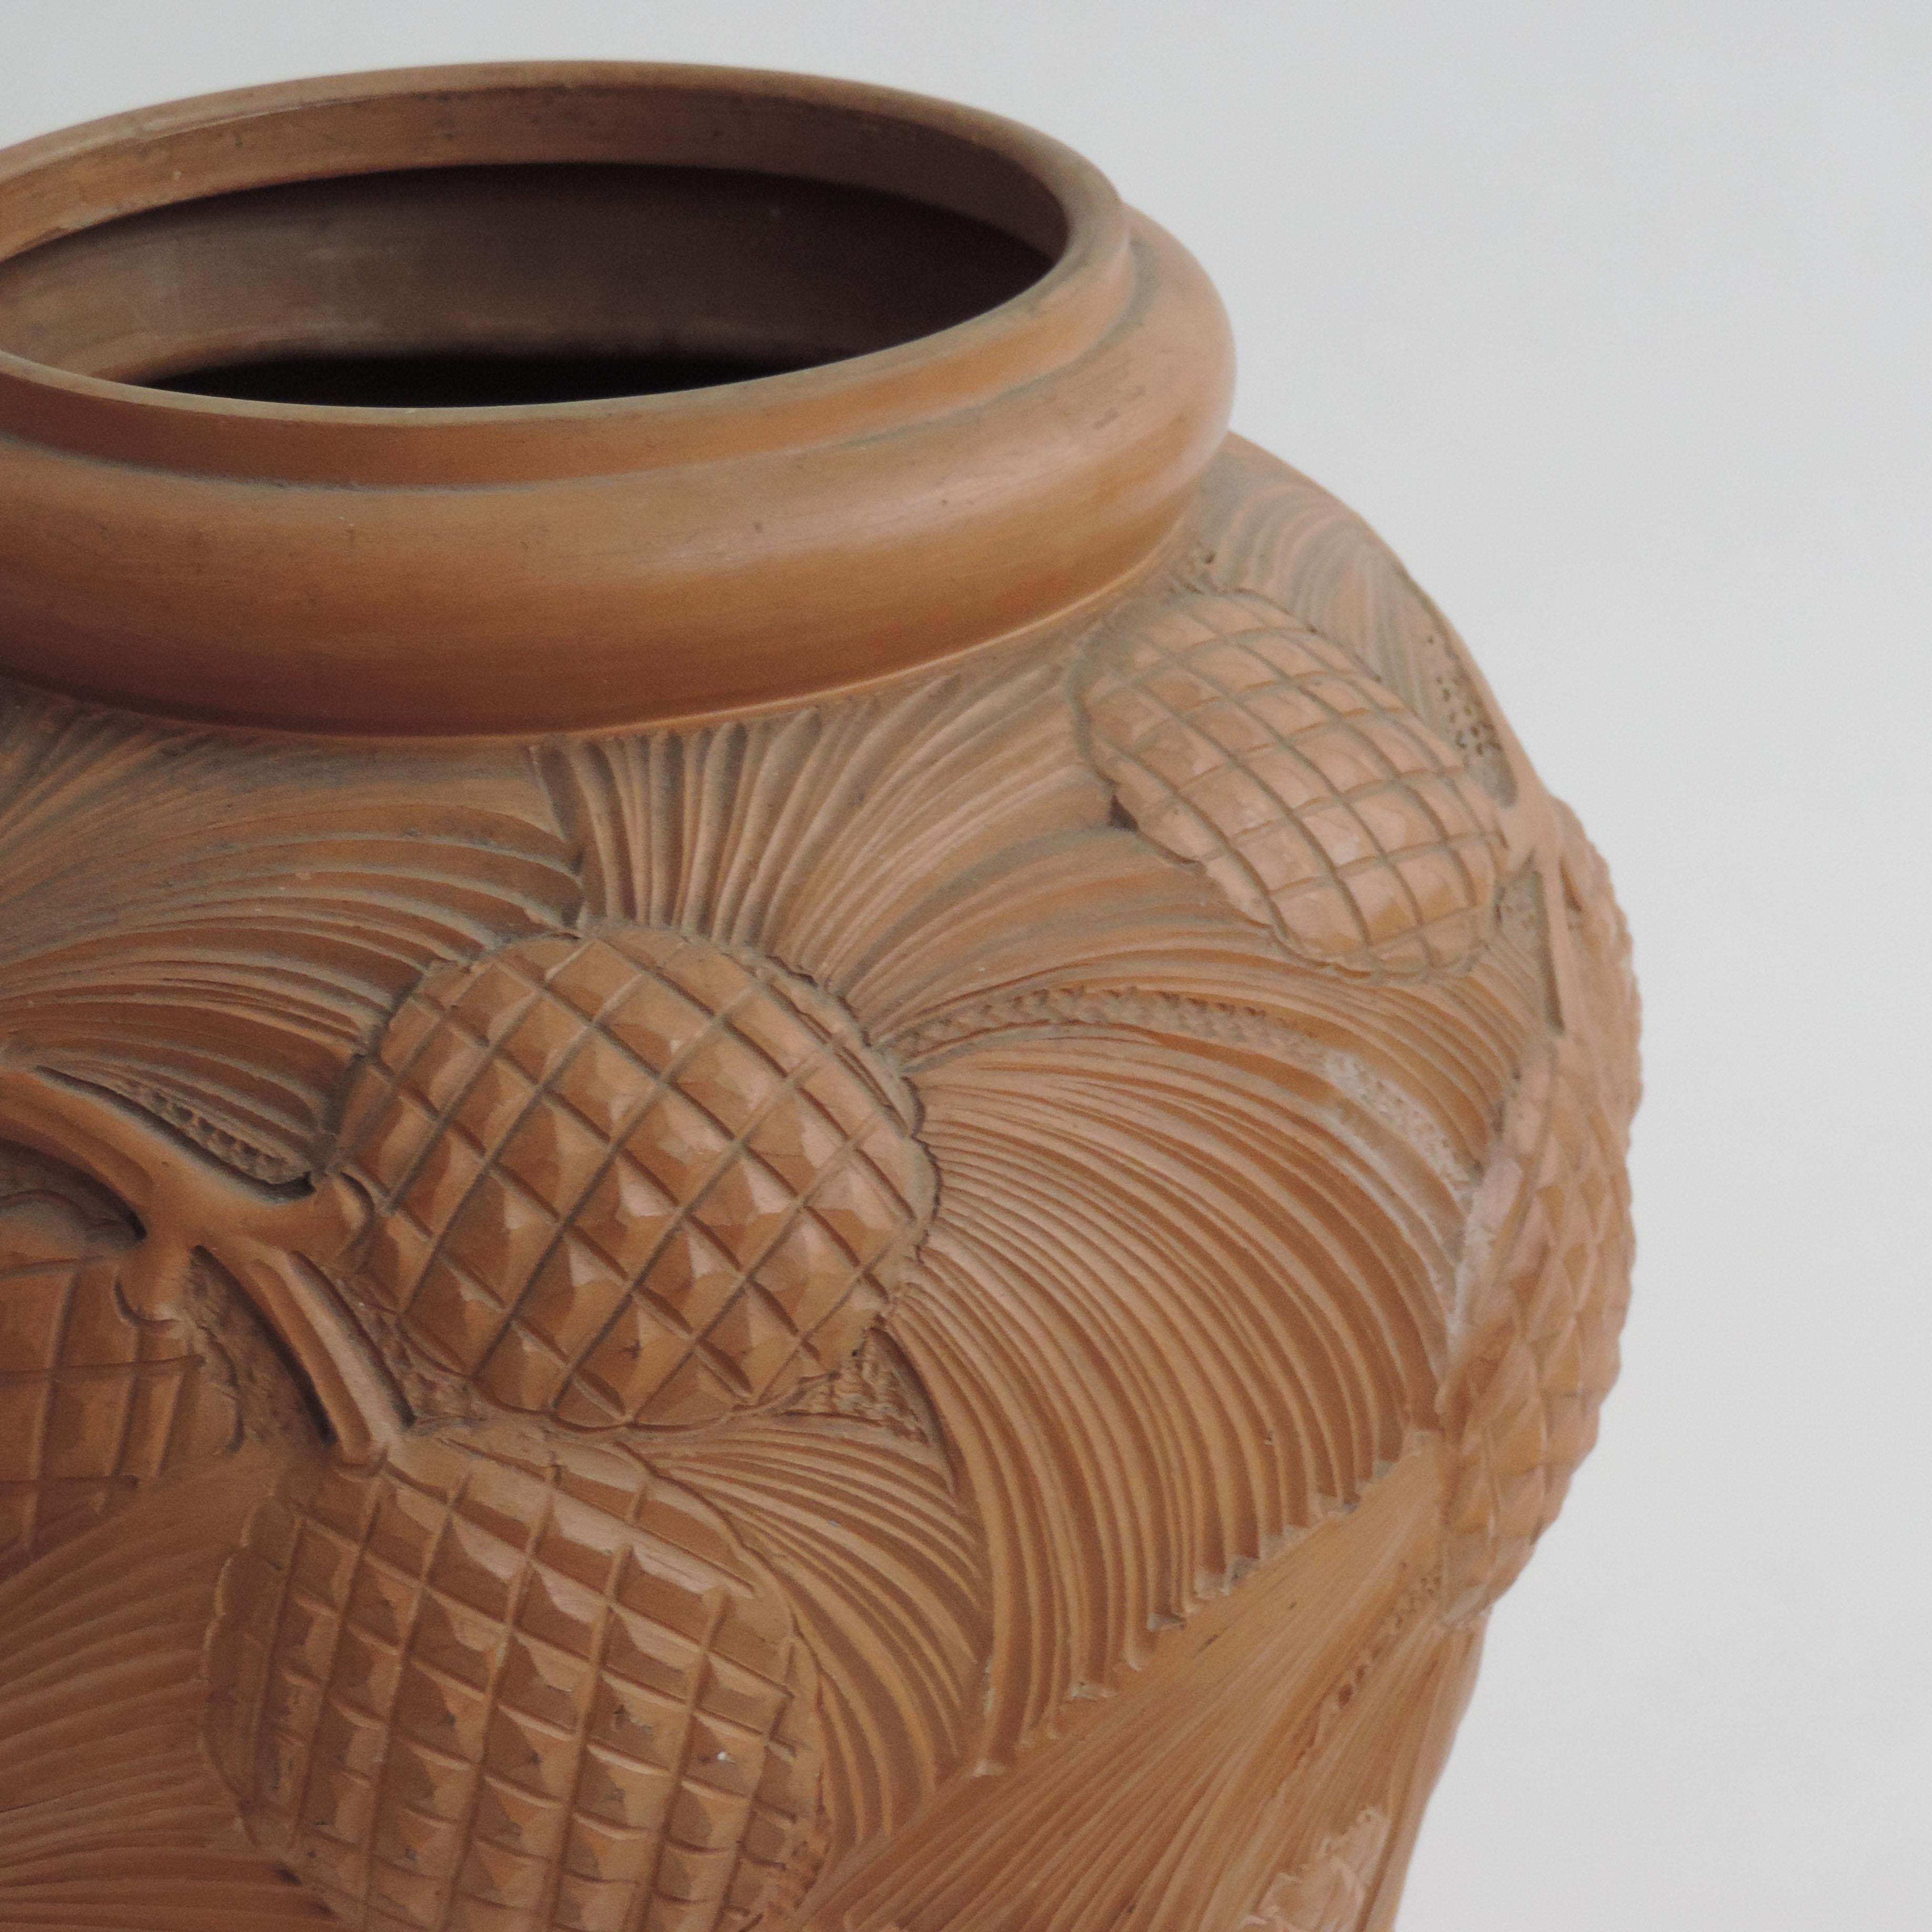 Mid-20th Century Italian Large Pines Decorated Terracotta Vase, 1940s For Sale